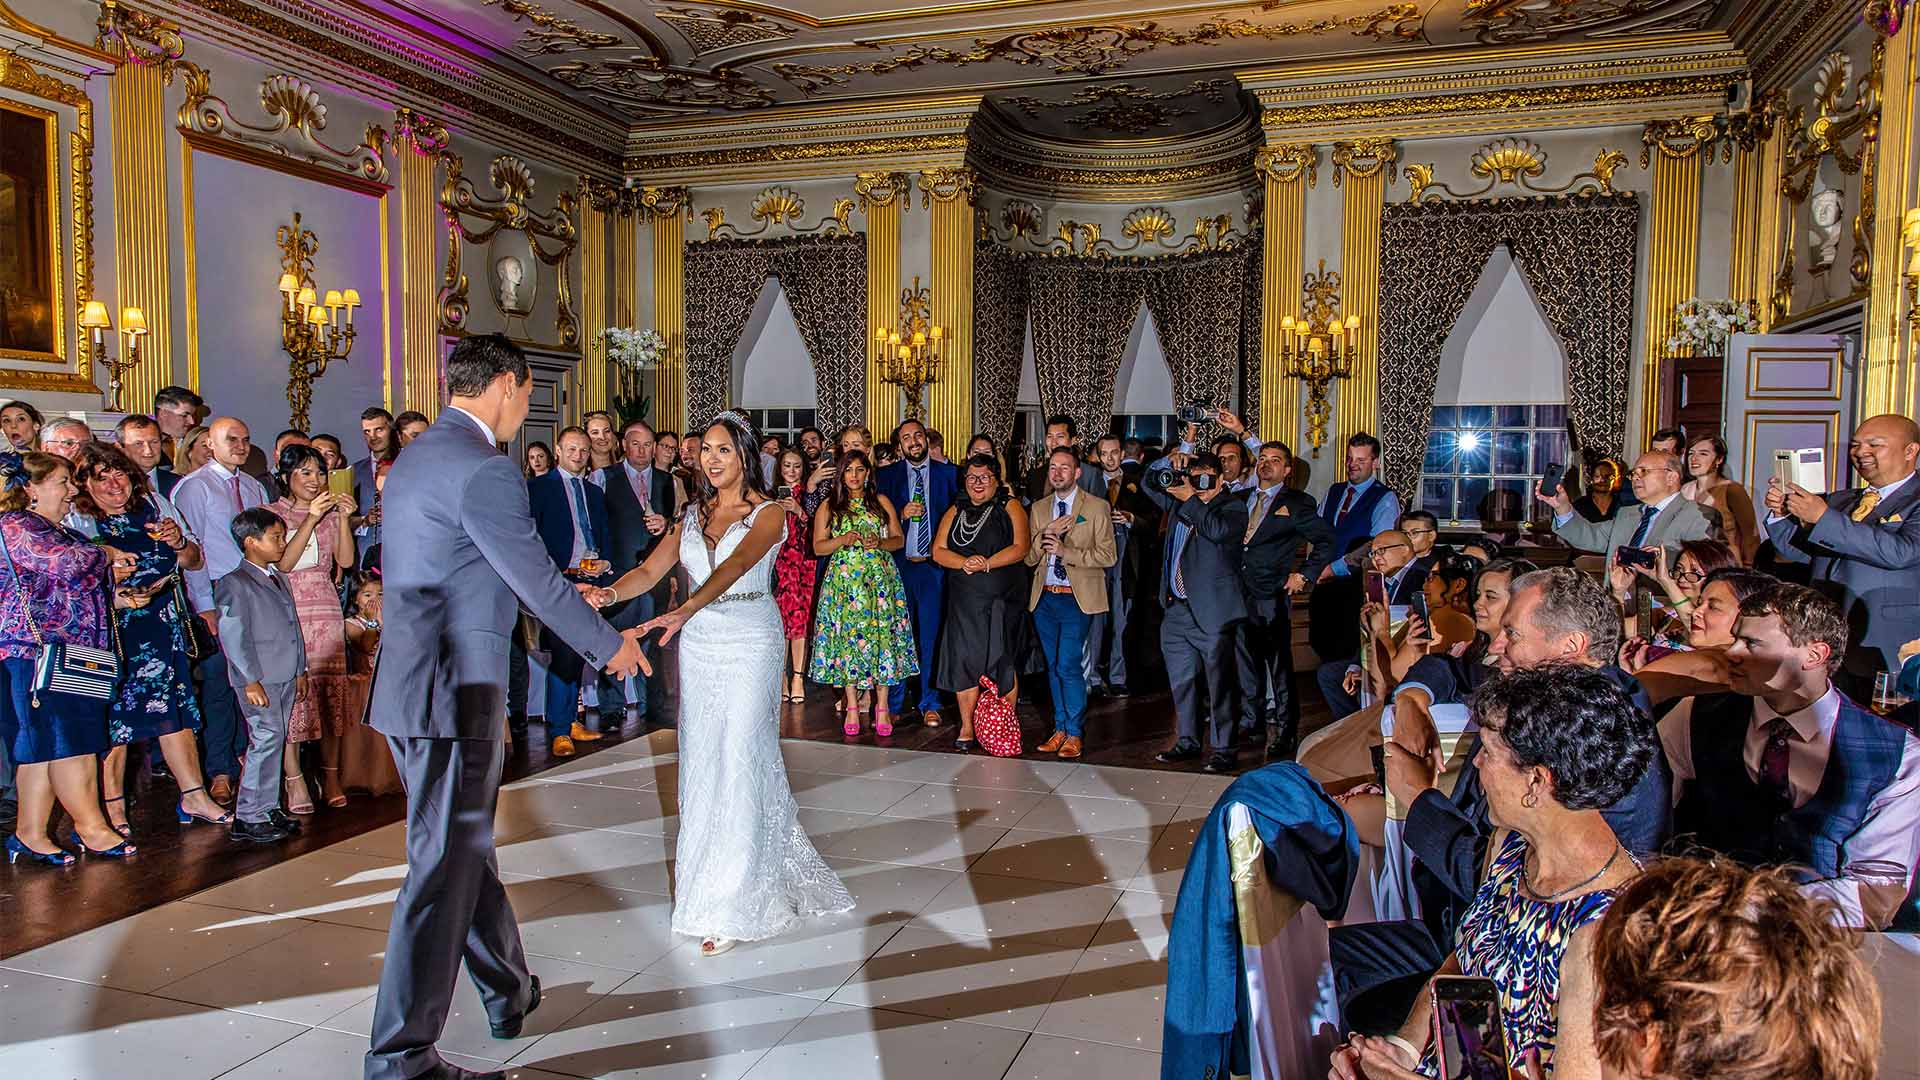 Bride and Groom in a Ballroom having their first dance on their wedding day